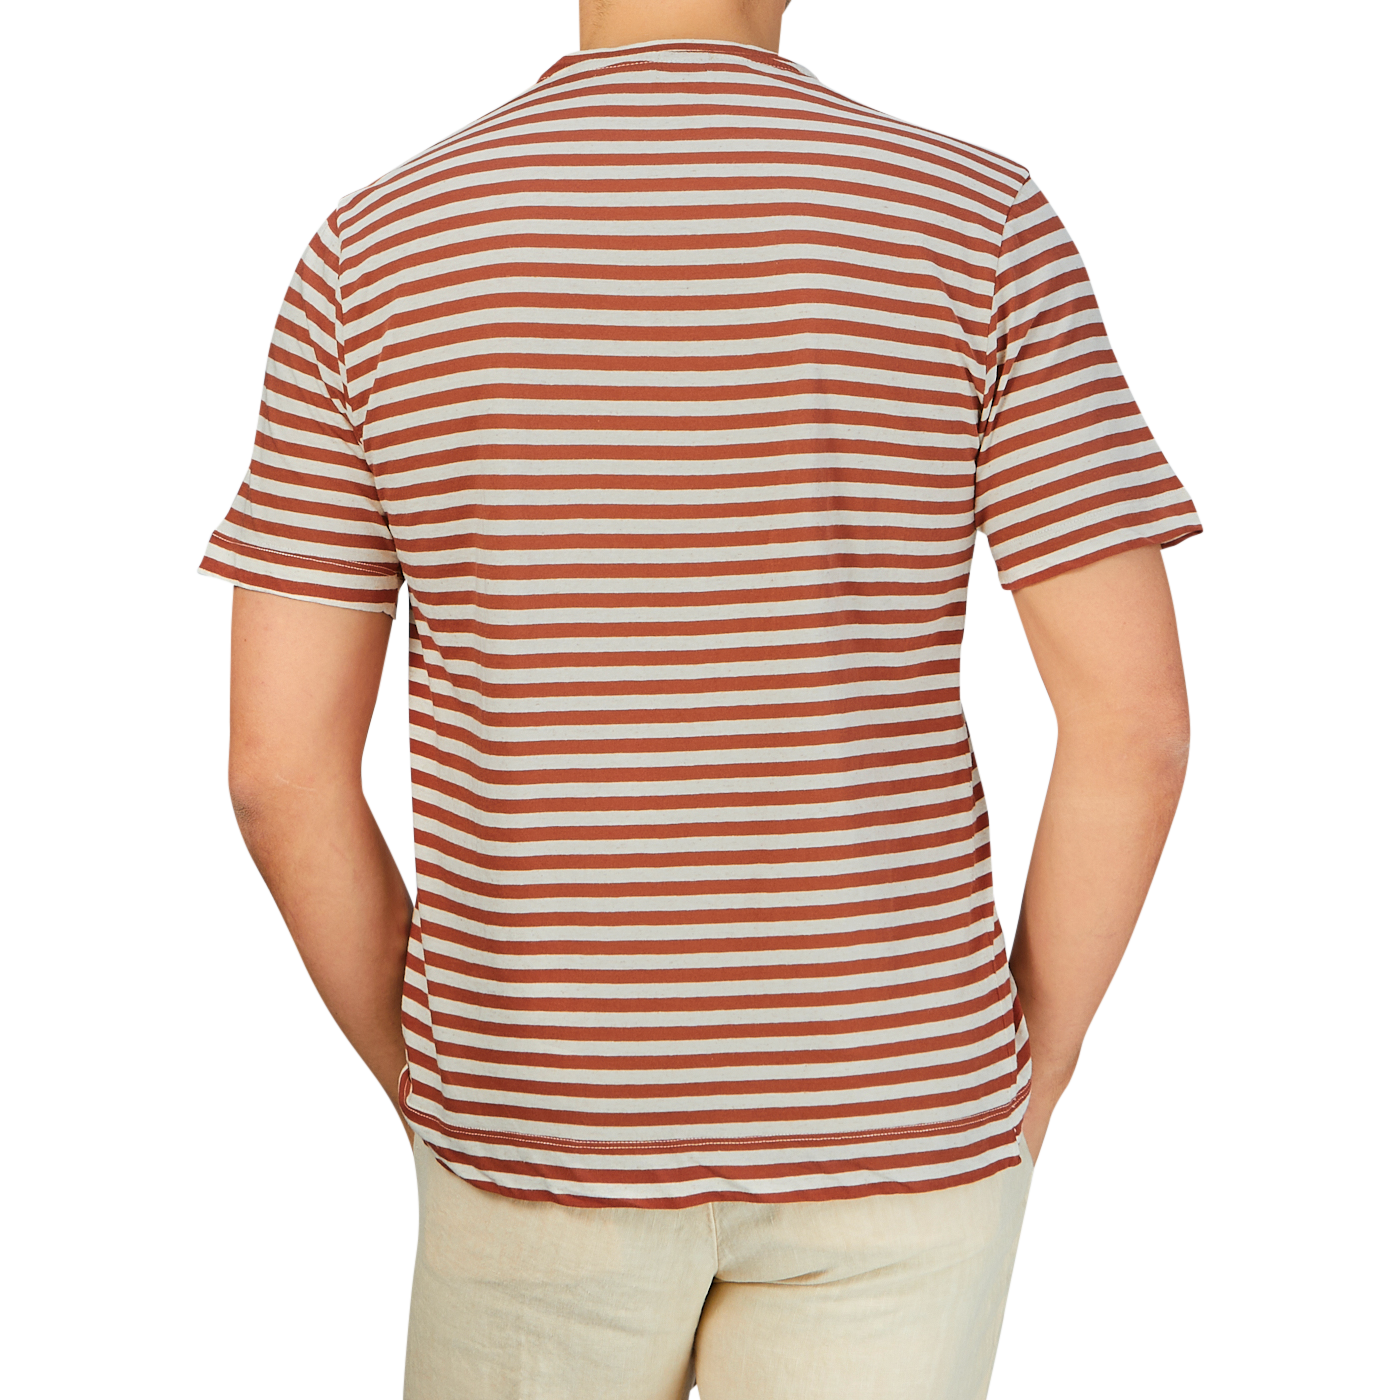 A person from behind wearing a Massimo Alba Rust Brown Striped Cotton Linen T-Shirt with red and white horizontal stripes.